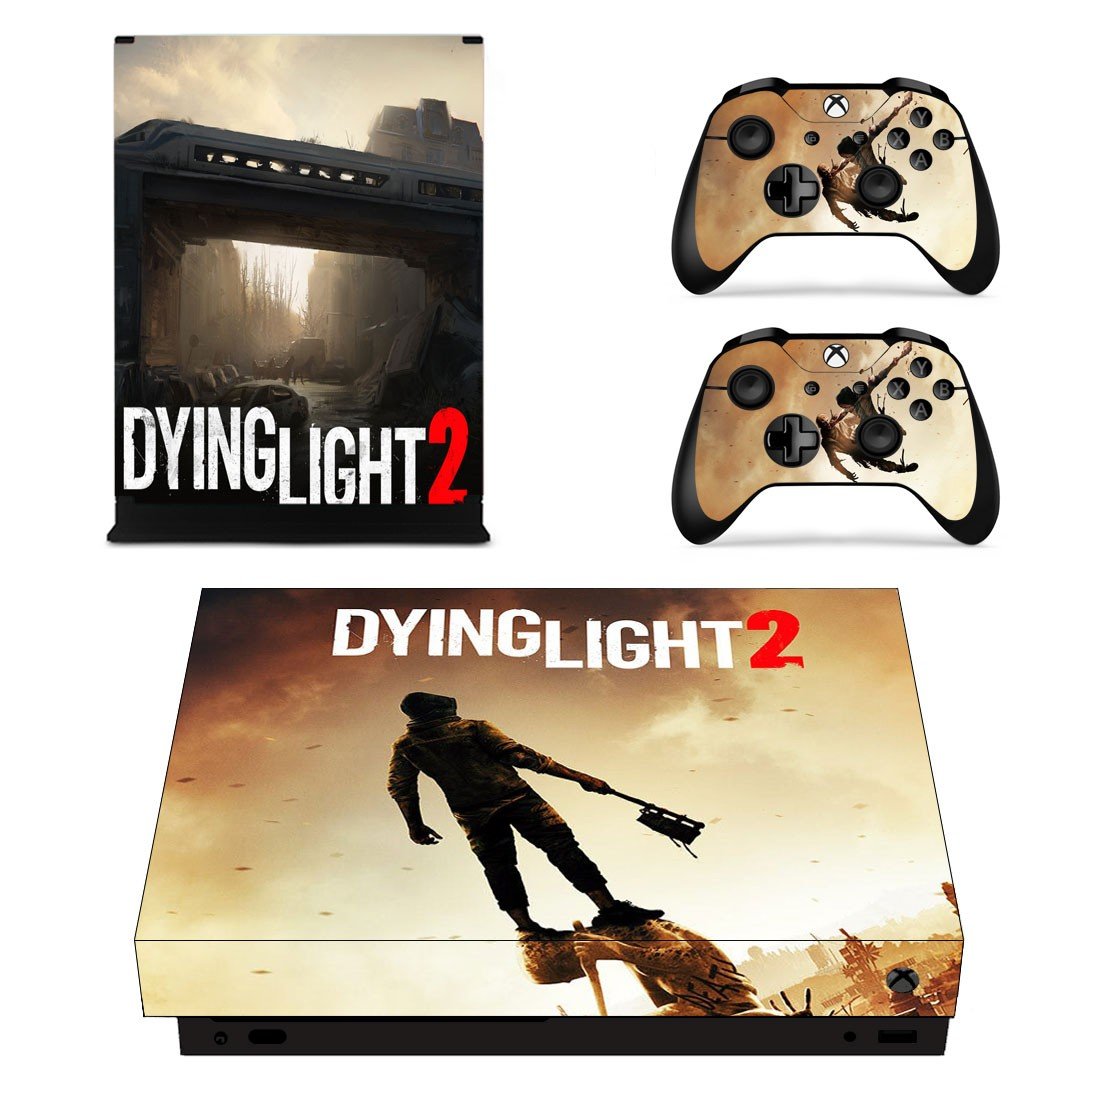 dying light 2 xbox one file size